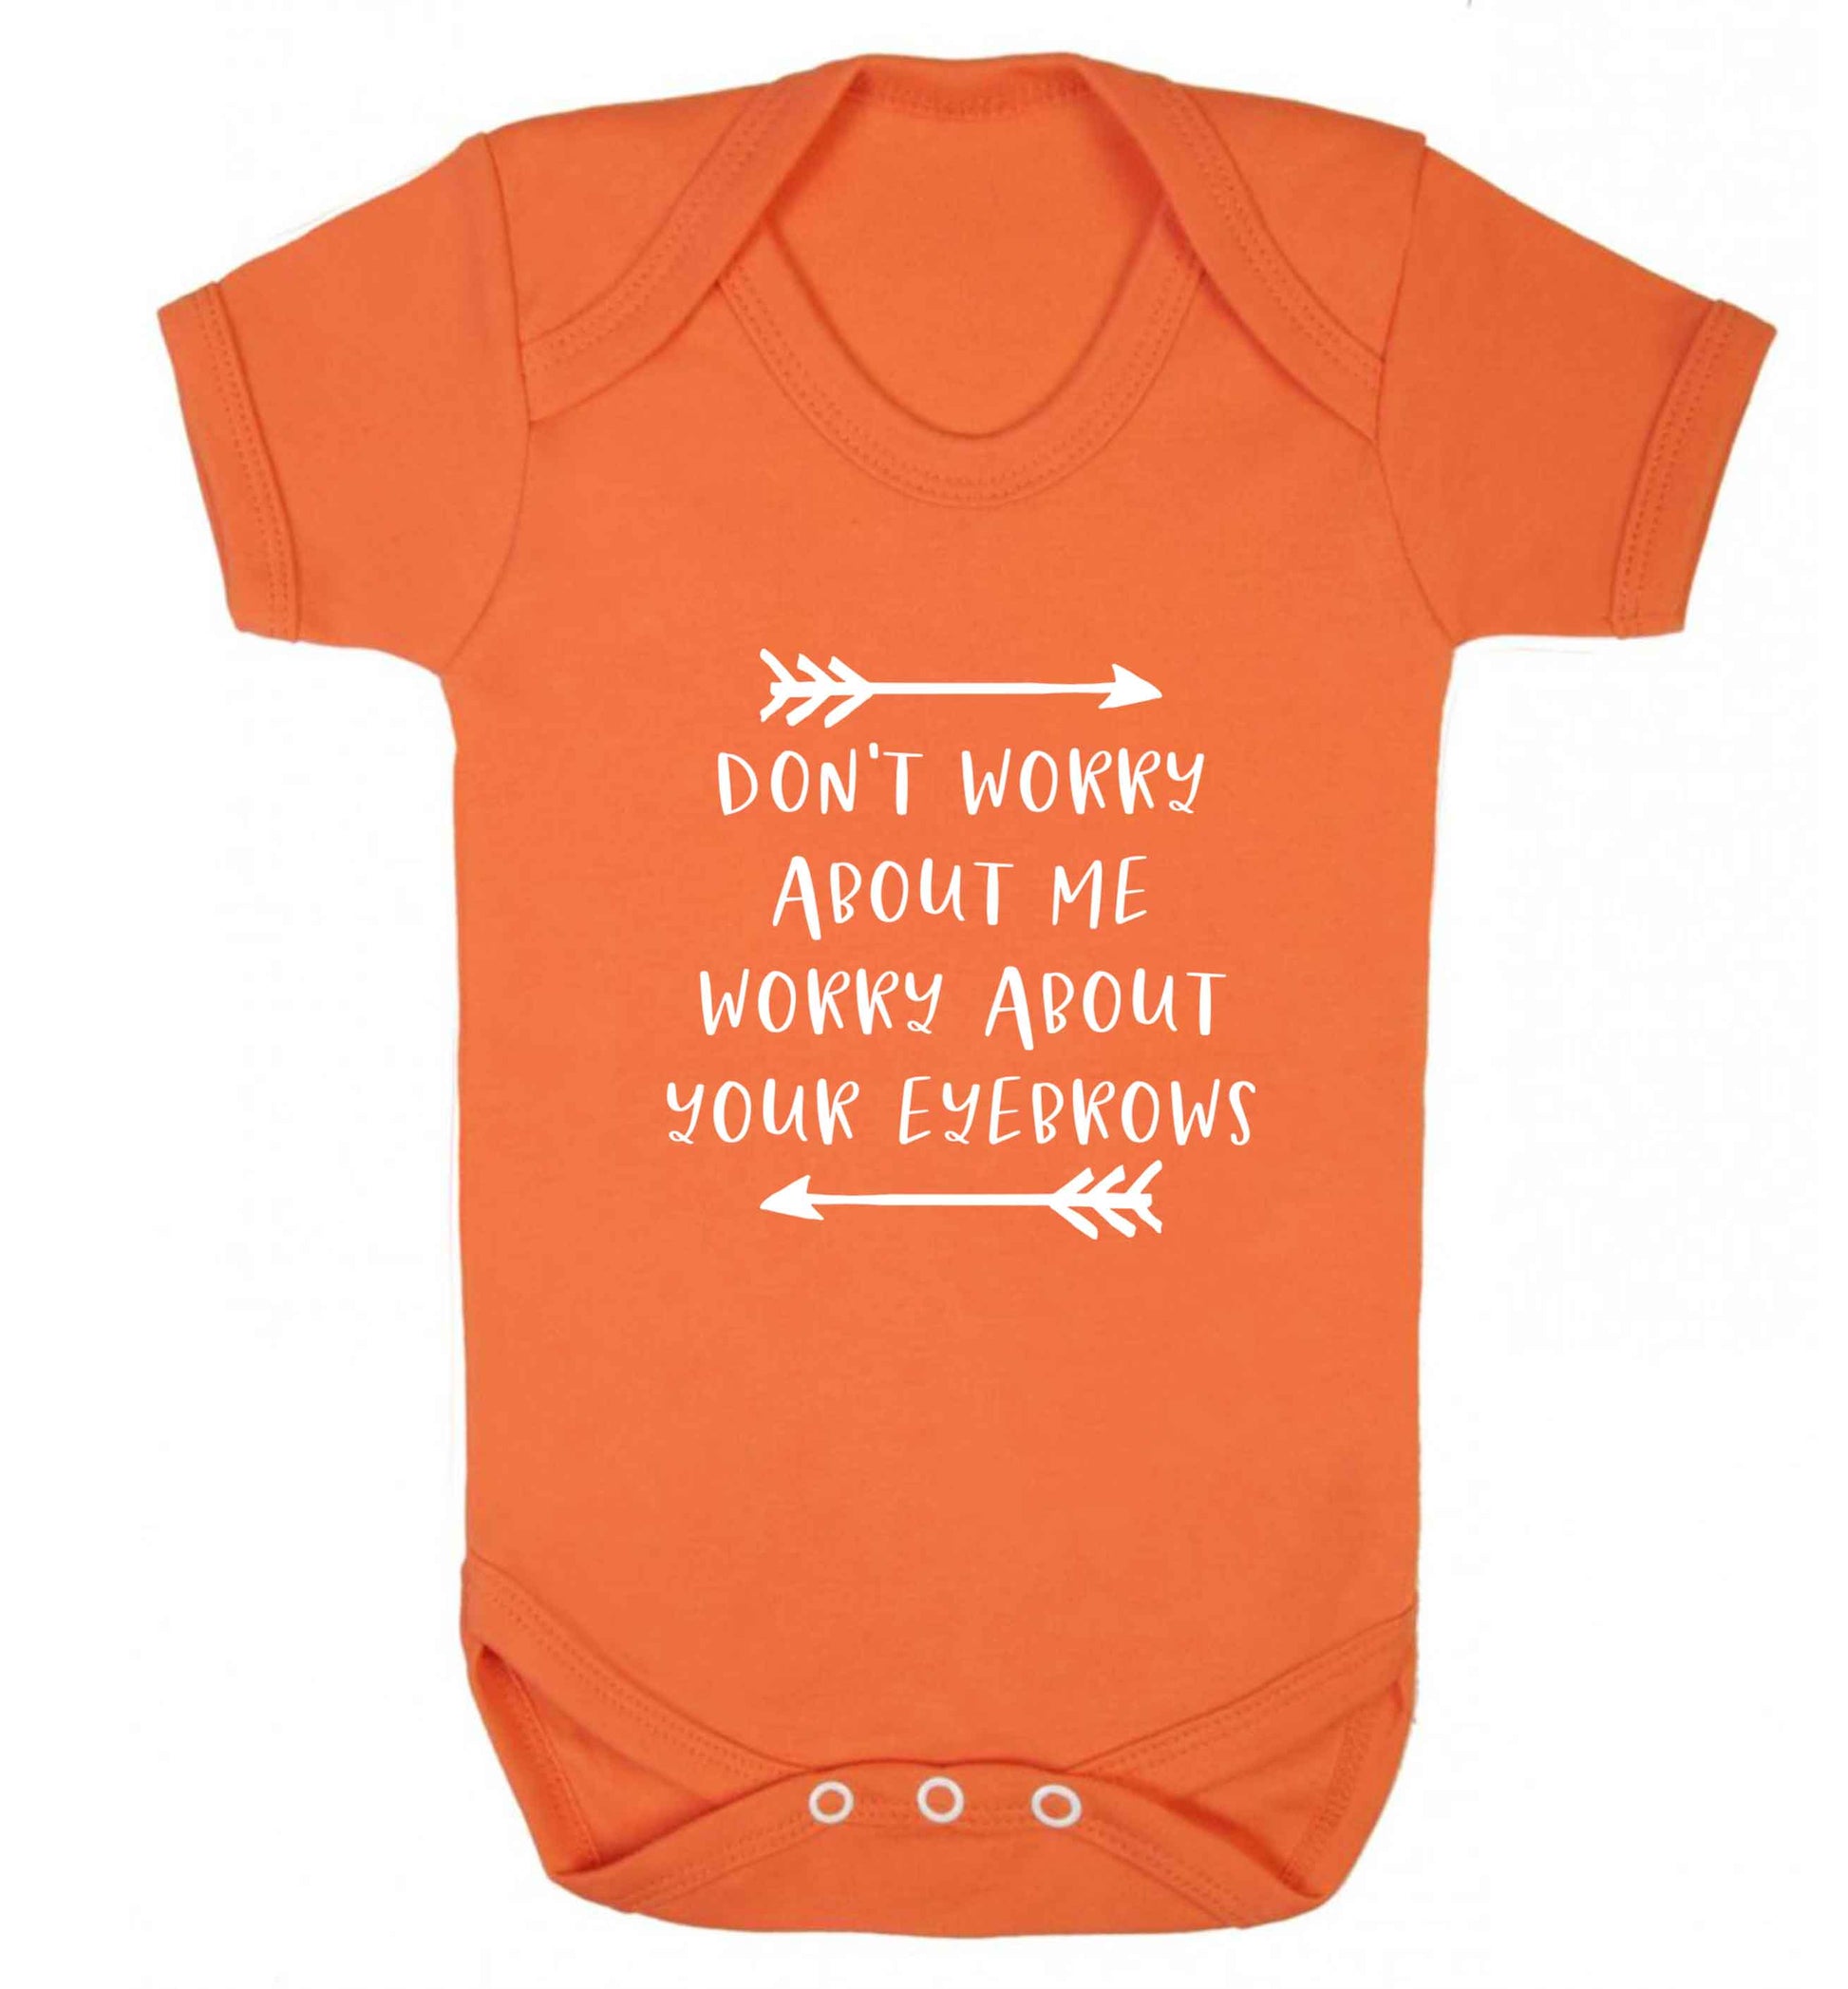 Don't worry about me worry about your eyebrows baby vest orange 18-24 months